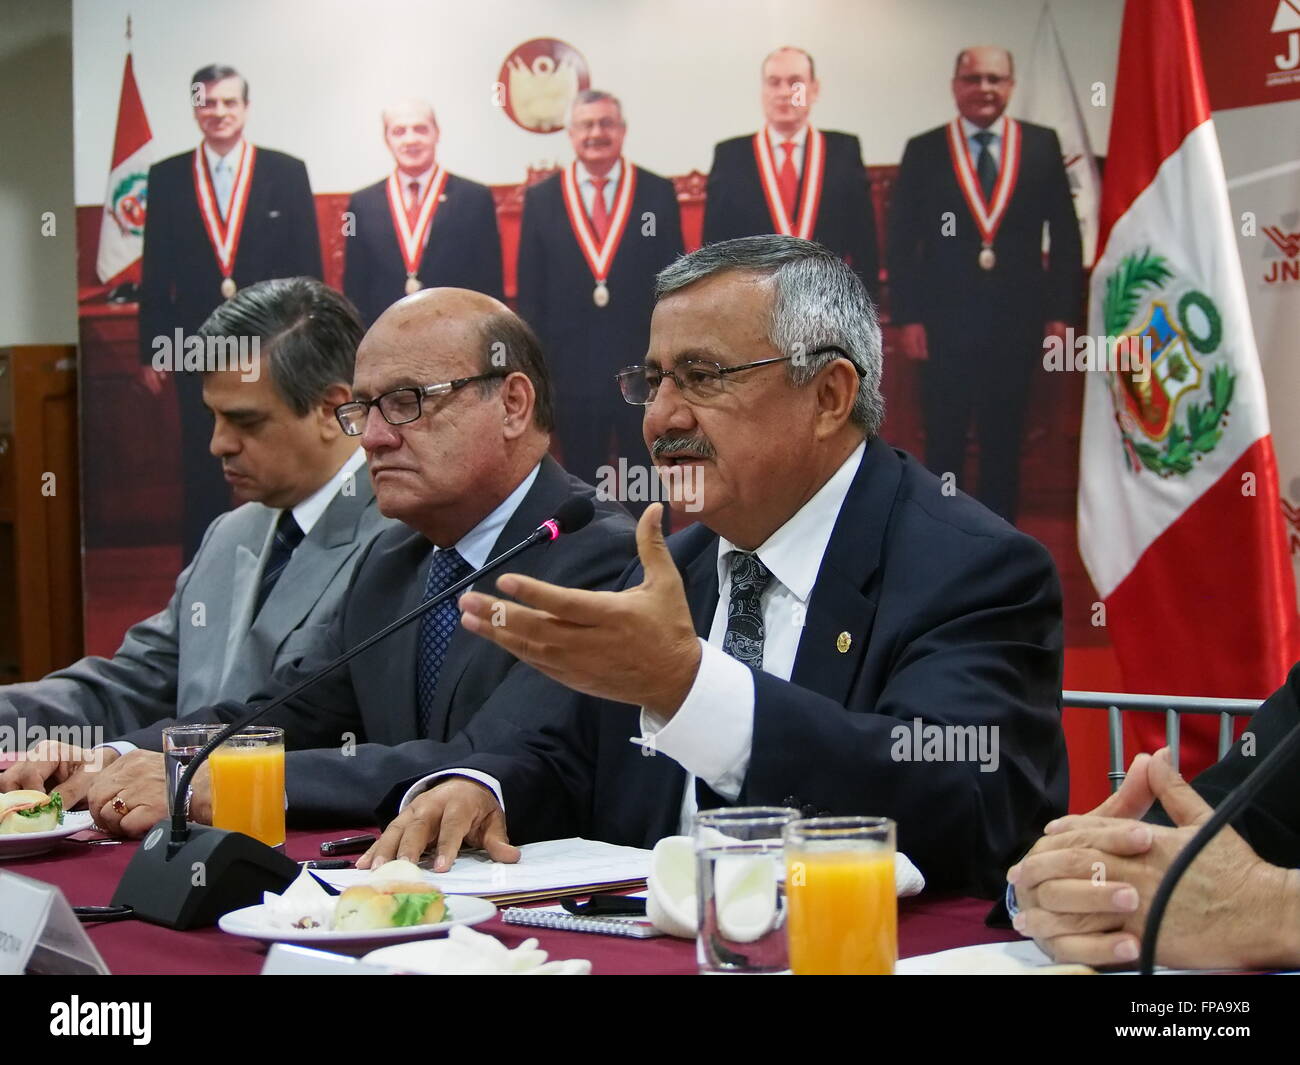 Lima, Peru. 17th March, 2016. Dr. Francisco Tavara, and full of the National Jury of Elections, gave statements to the foreign press accredited in Peru, regarding the questions that have lately made their institution. The president of JNE assured that the electoral process is being carried out normally and the taken decisions, that excluded some main candidates, have been made according to existing laws. Credit:  Carlos García Granthon/Alamy Live News Stock Photo